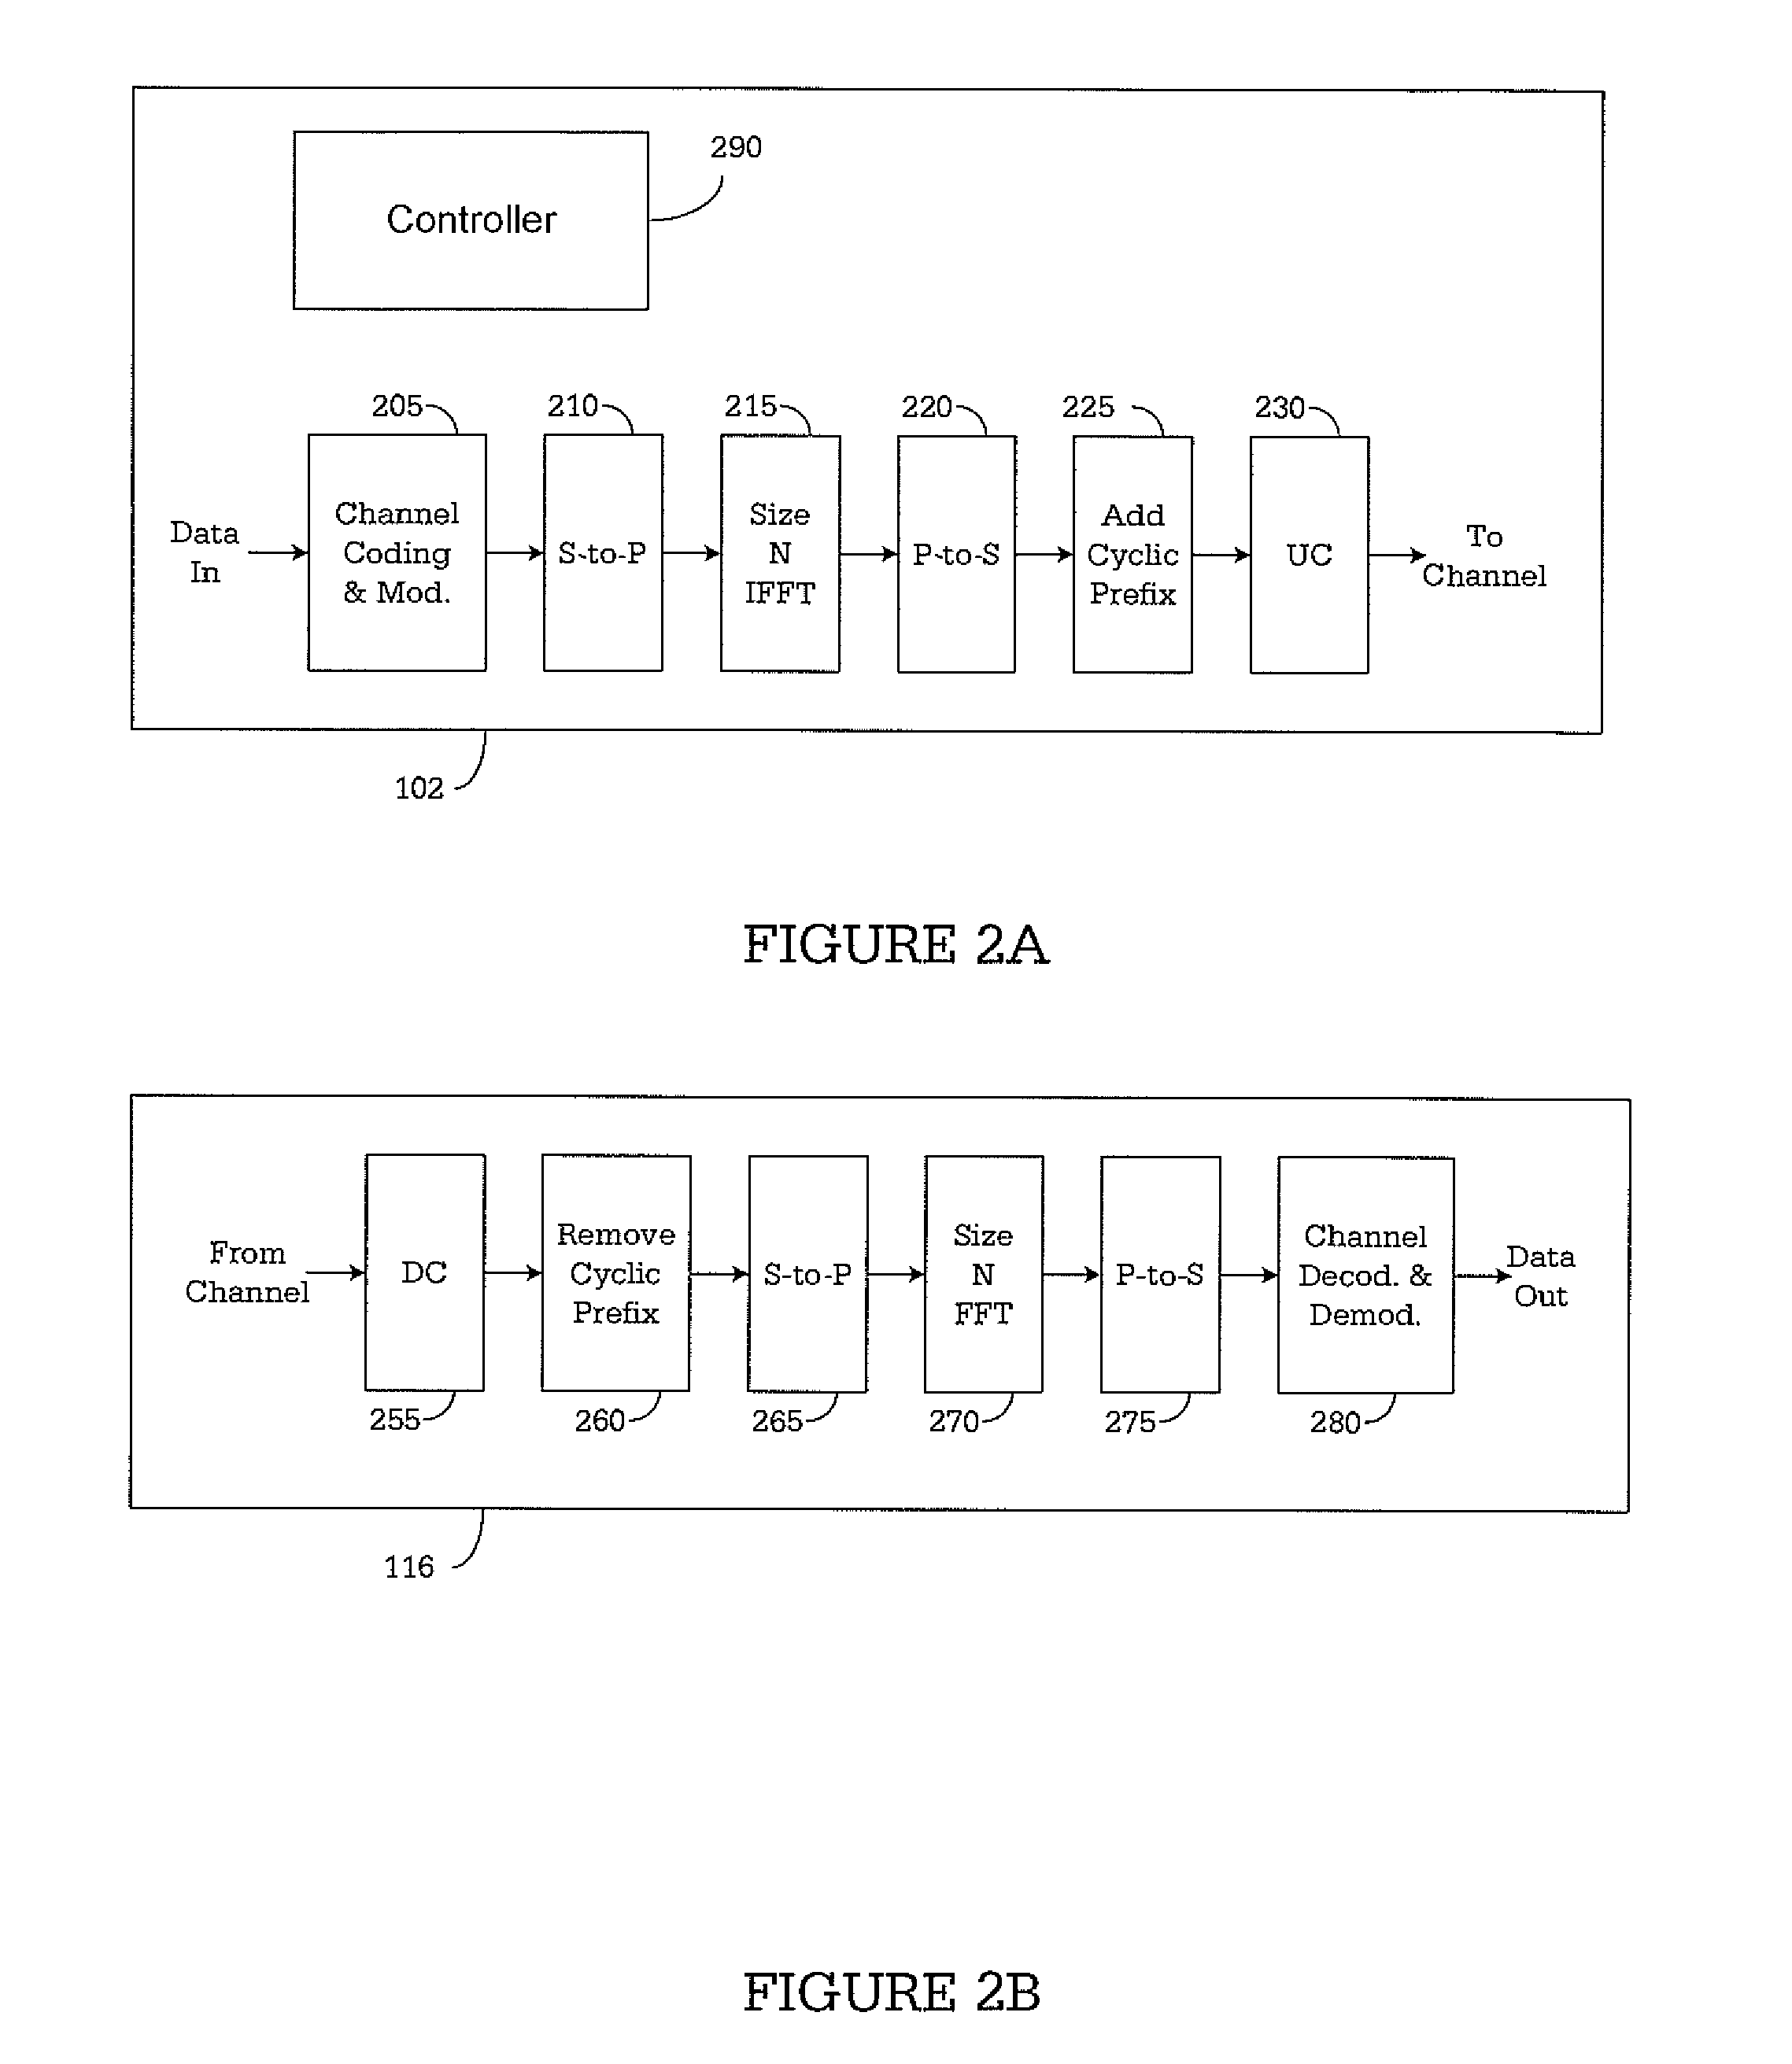 Methods and apparatus to support base station detection and selection in multi-tier wireless networks